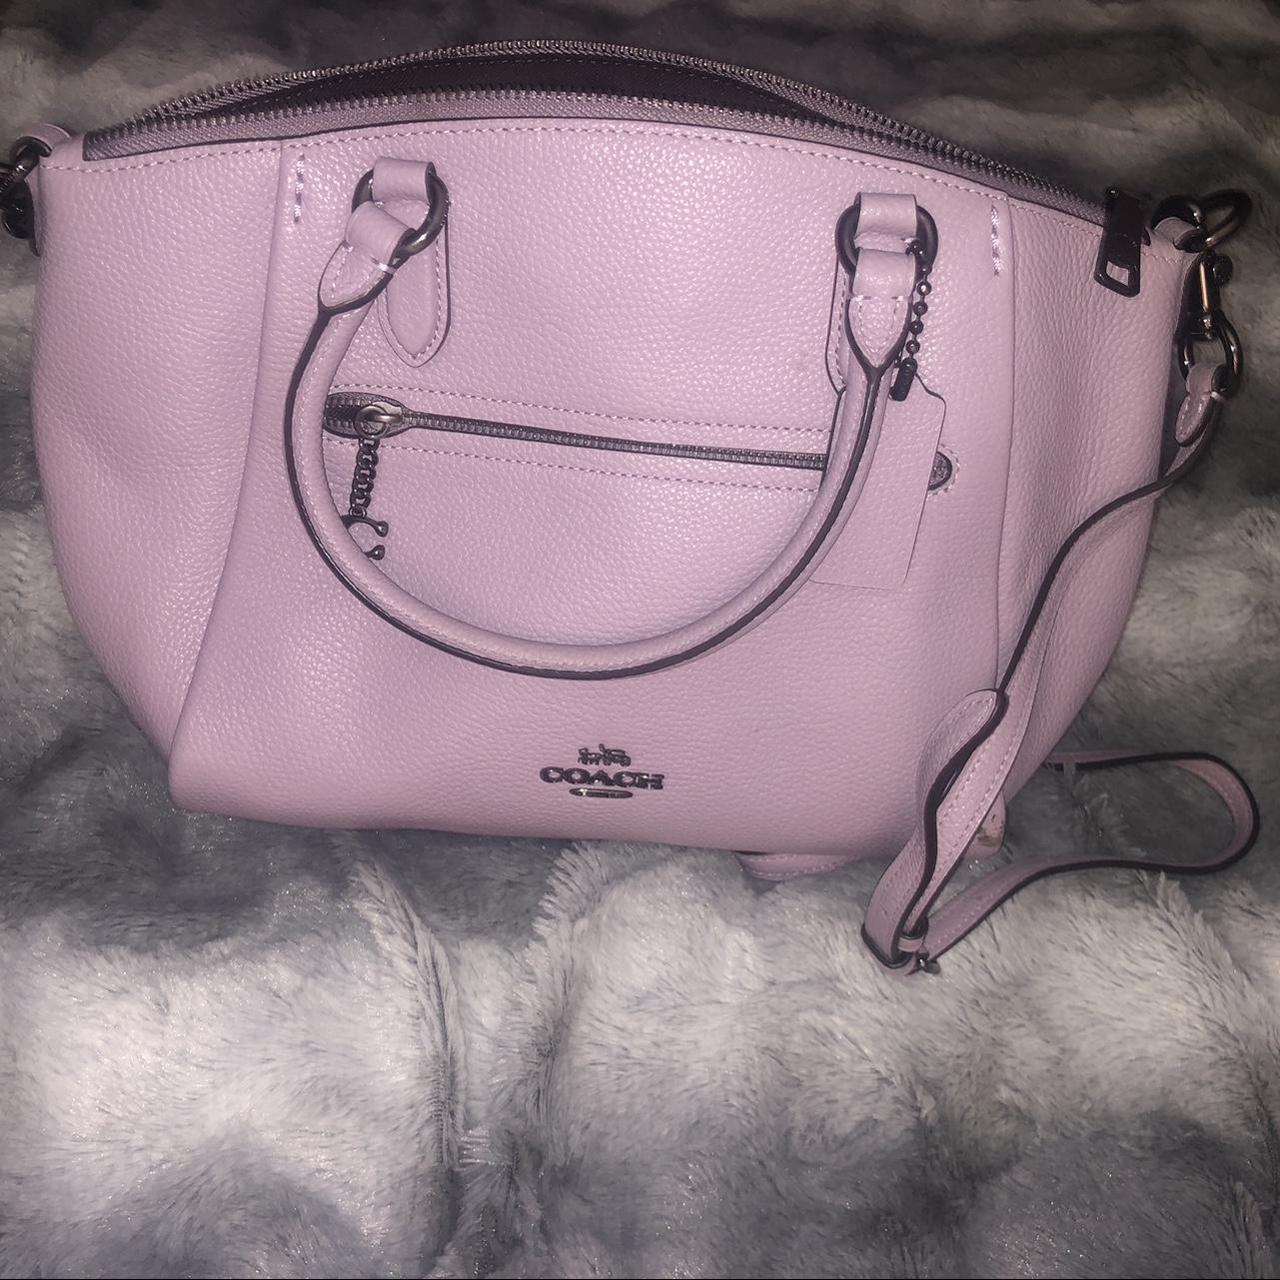 Purple, Gray, And White Coach Handbag for Sale in Charlotte, NC - OfferUp